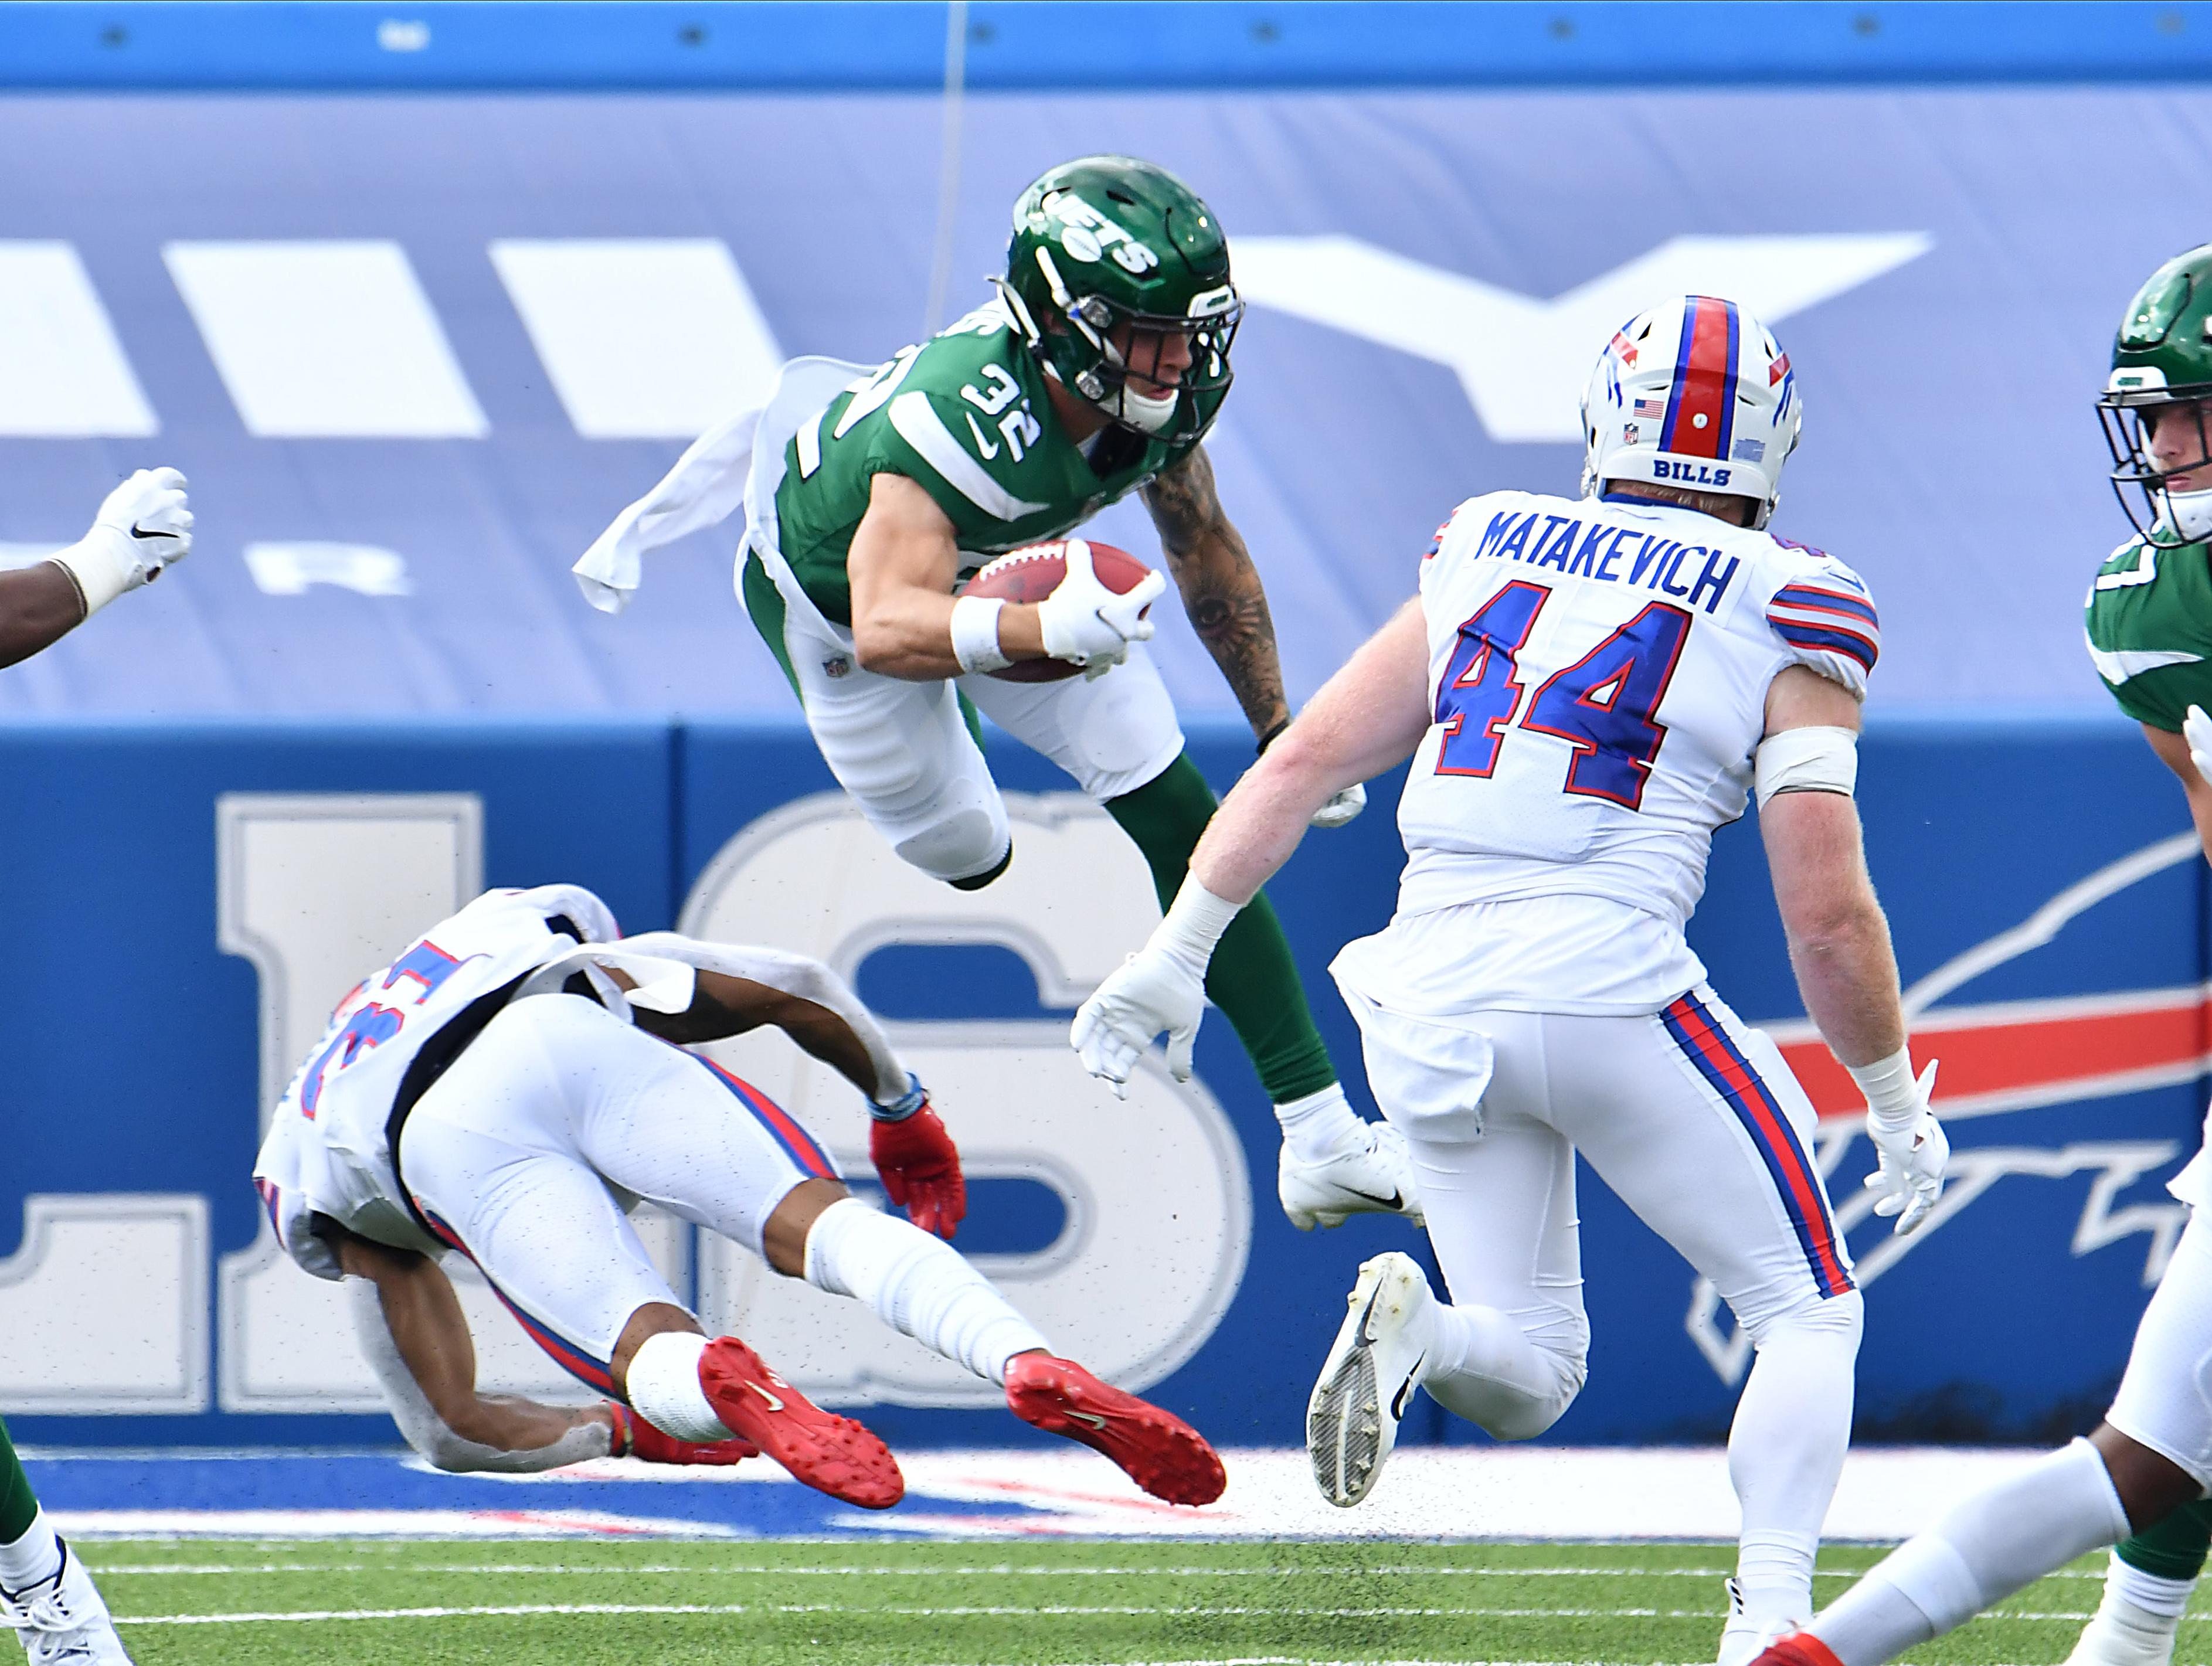 Sep 13, 2020; Orchard Park, New York, USA; New York Jets safety Ashtyn Davis (32) is upended by Buffalo Bills strong safety Dean Marlowe (31) on a kickoff return in the fourth quarter at Bills Stadium. Mandatory Credit: Mark Konezny-USA TODAY Sports / Mark Konezny-USA TODAY Sports